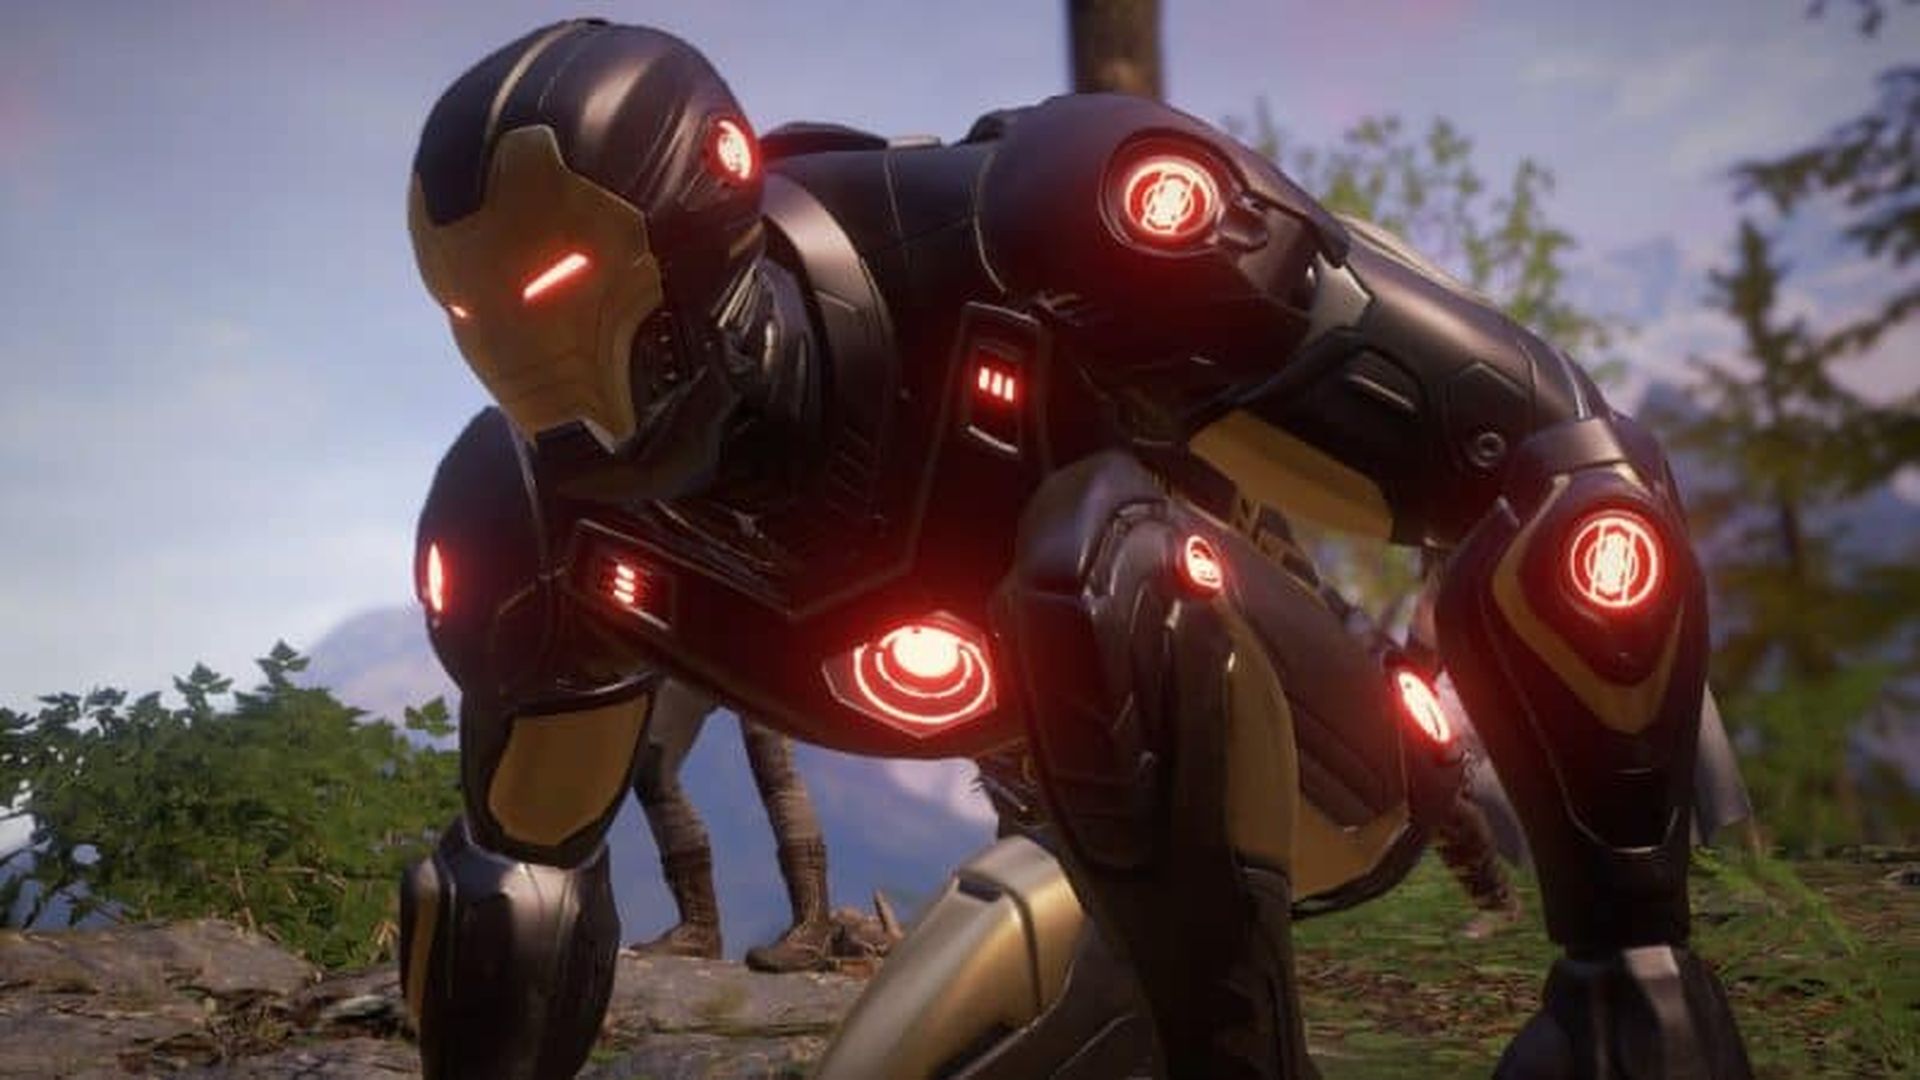 In this article, we are going to be covering the announcement of the EA Motive Iron Man game and all there is to know about it.